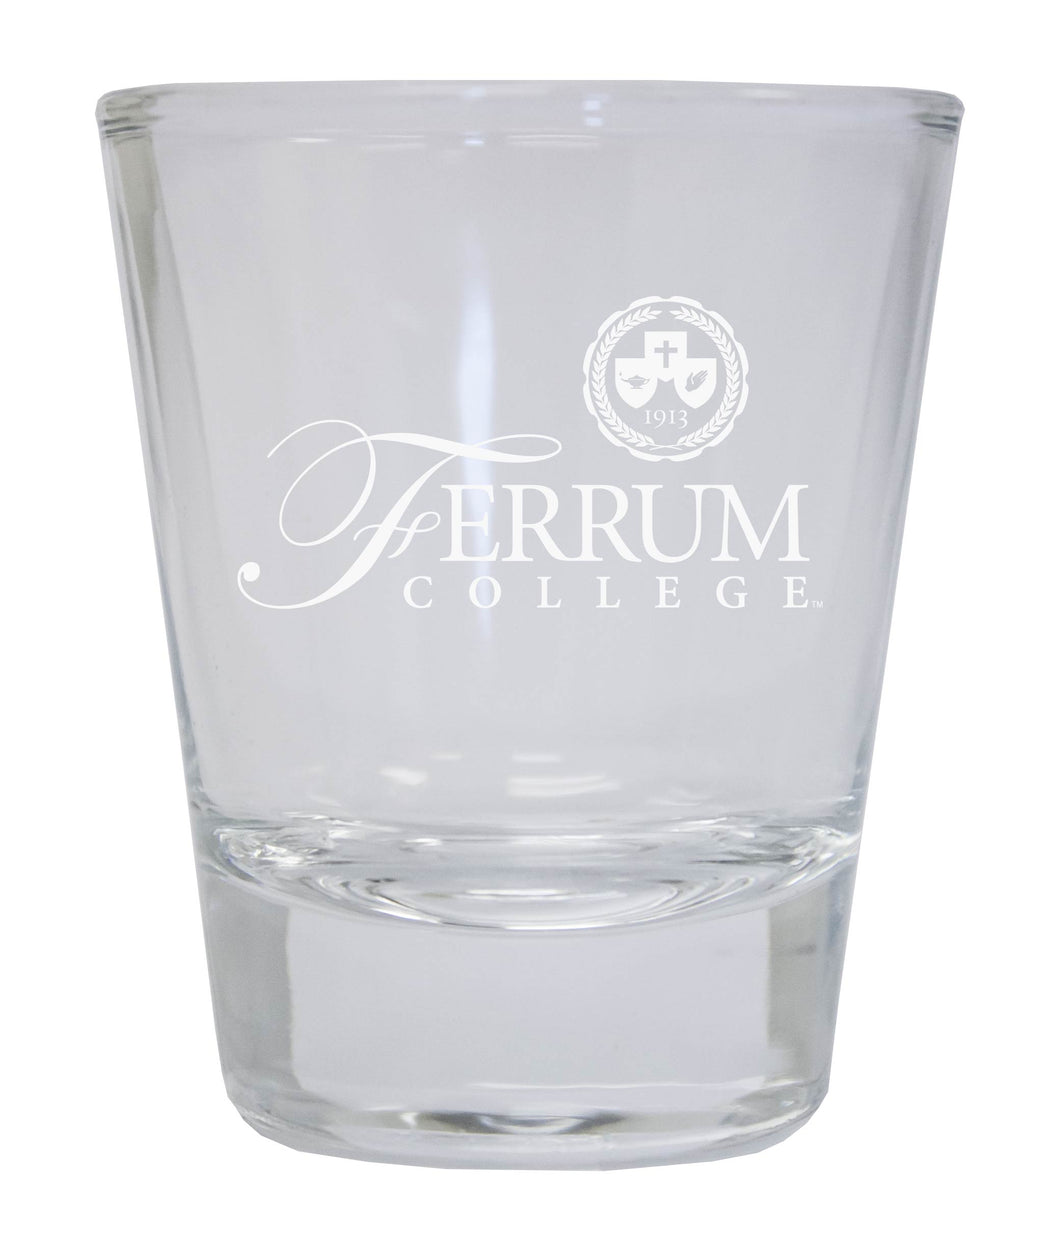 Ferrum College Etched Round Shot Glass Officially Licensed Collegiate Product